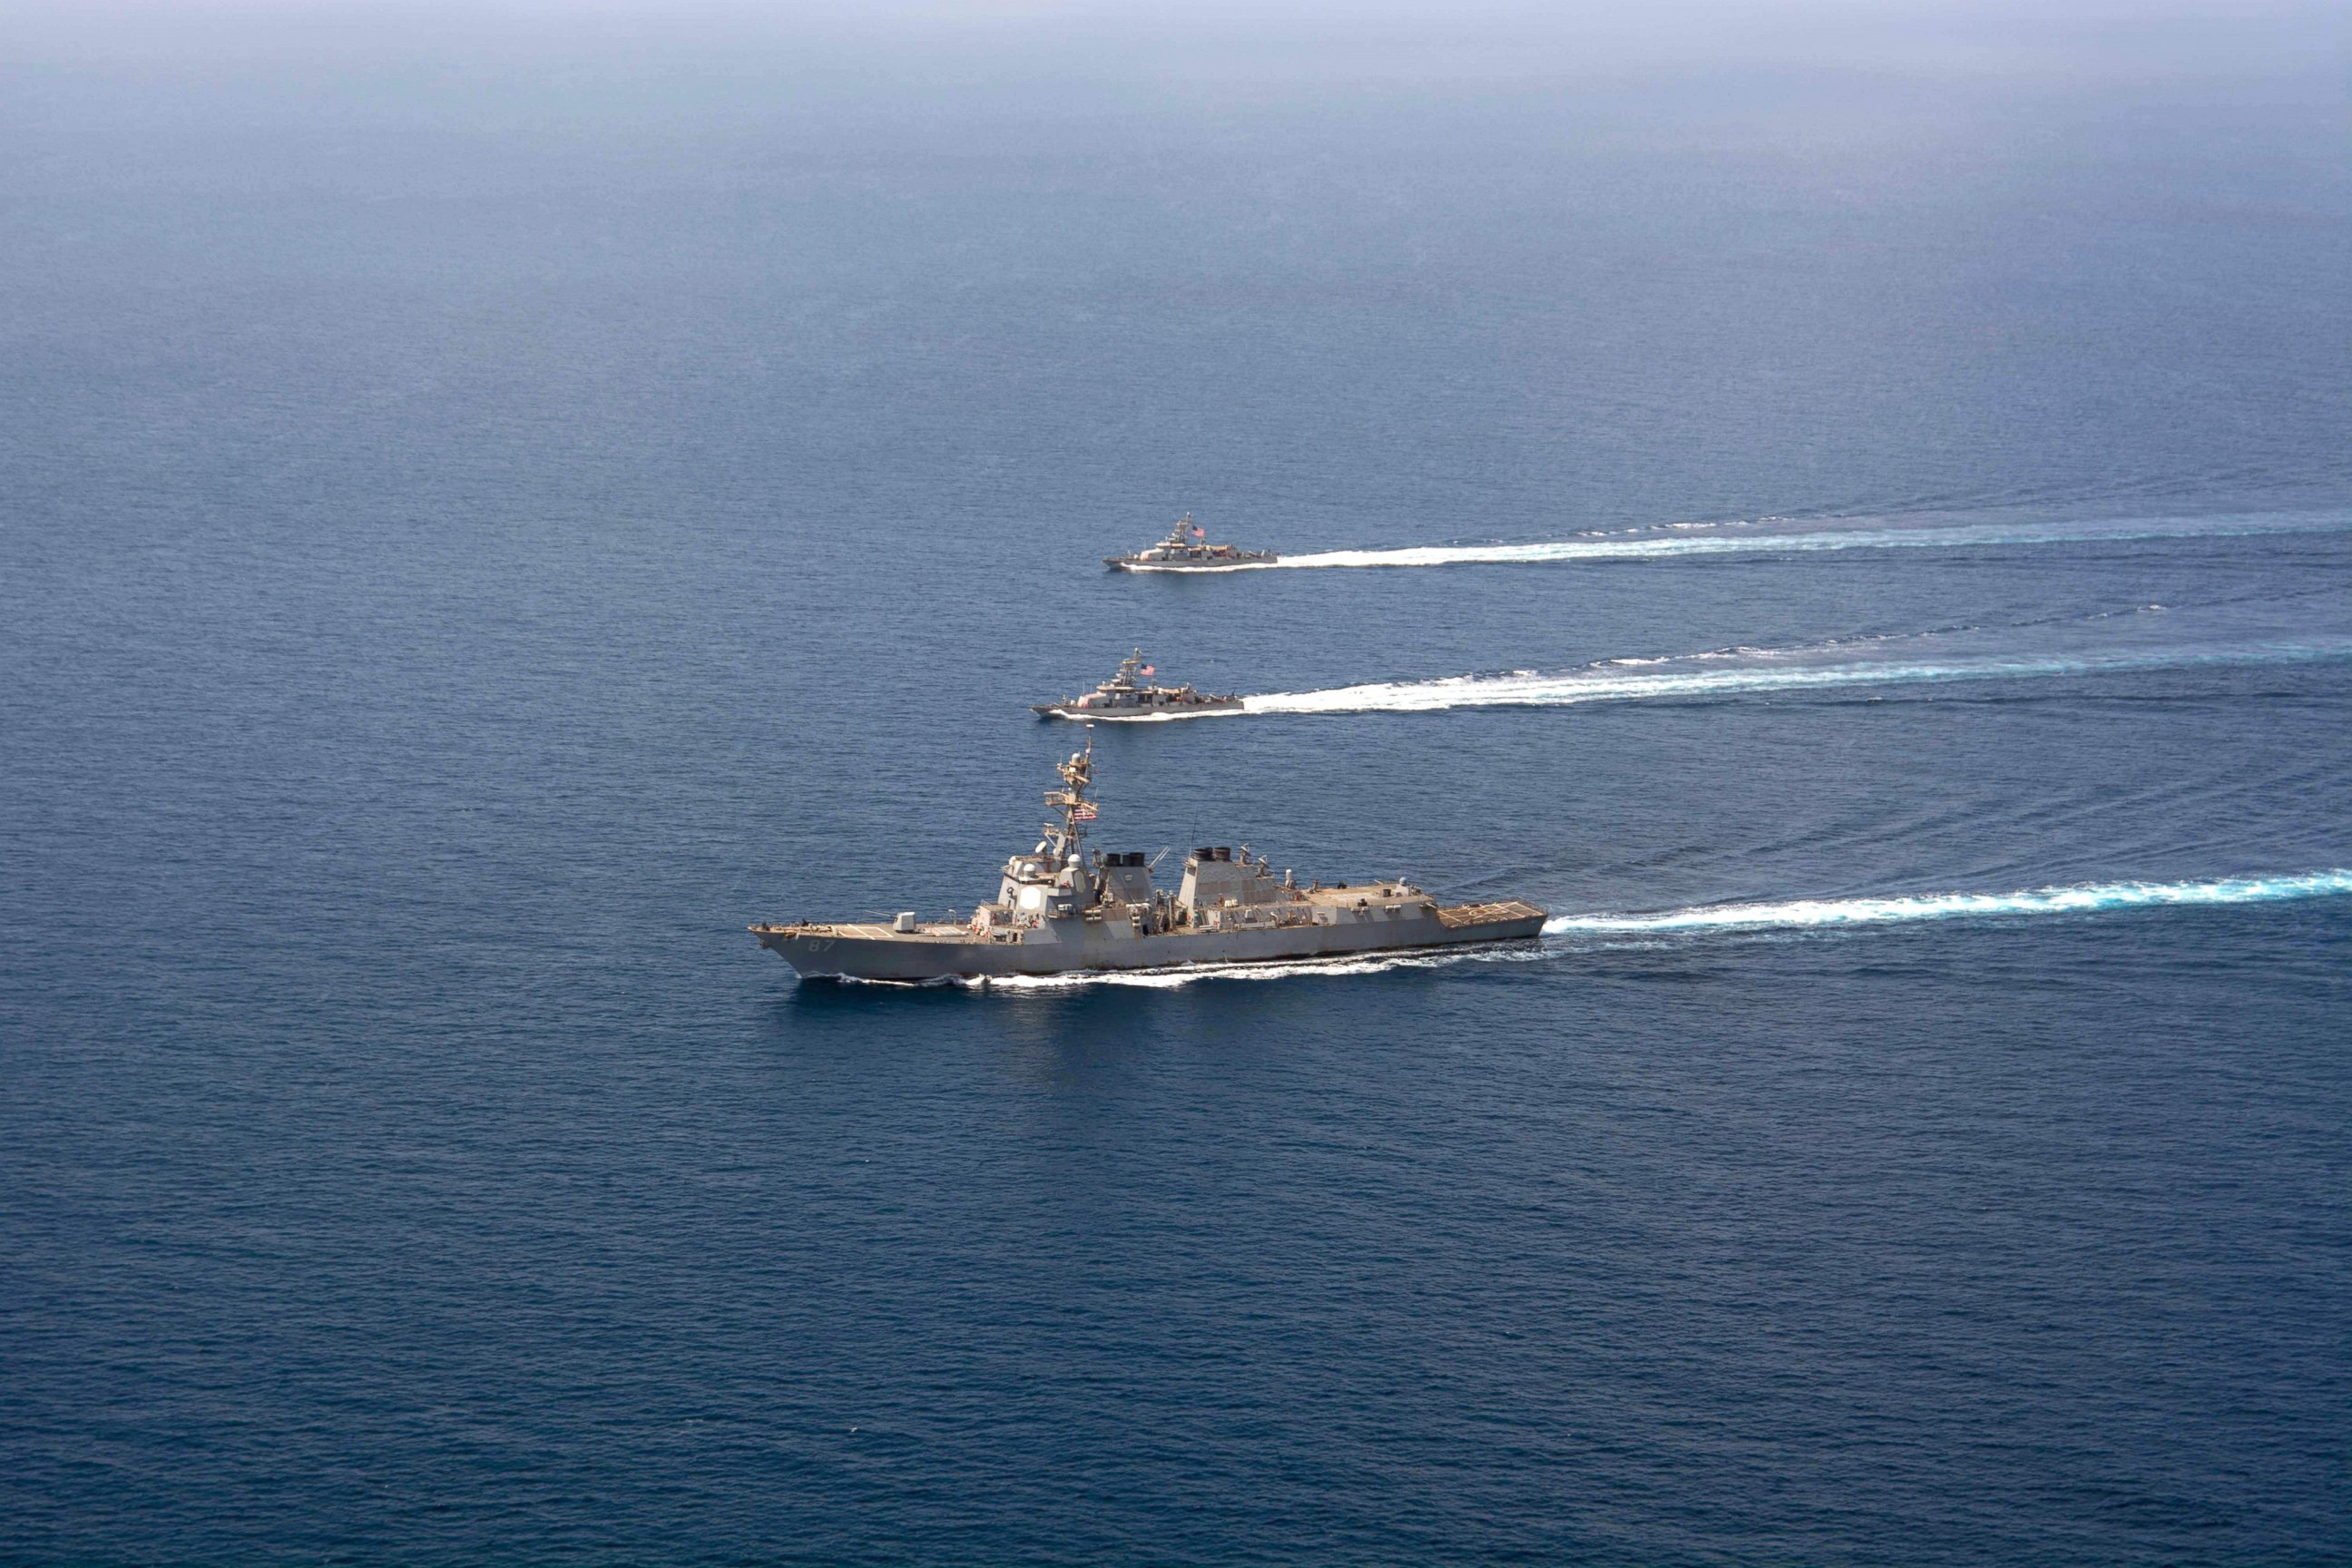 PHOTO: A file image released by the US Navy shows a guided-missile destroyer USS Mason (DDG 87) conducting formation exercises with the Cyclone-class patrol crafts USS Tempest (PC 2) and USS Squall (PC 7), on Sept. 10, 2016.